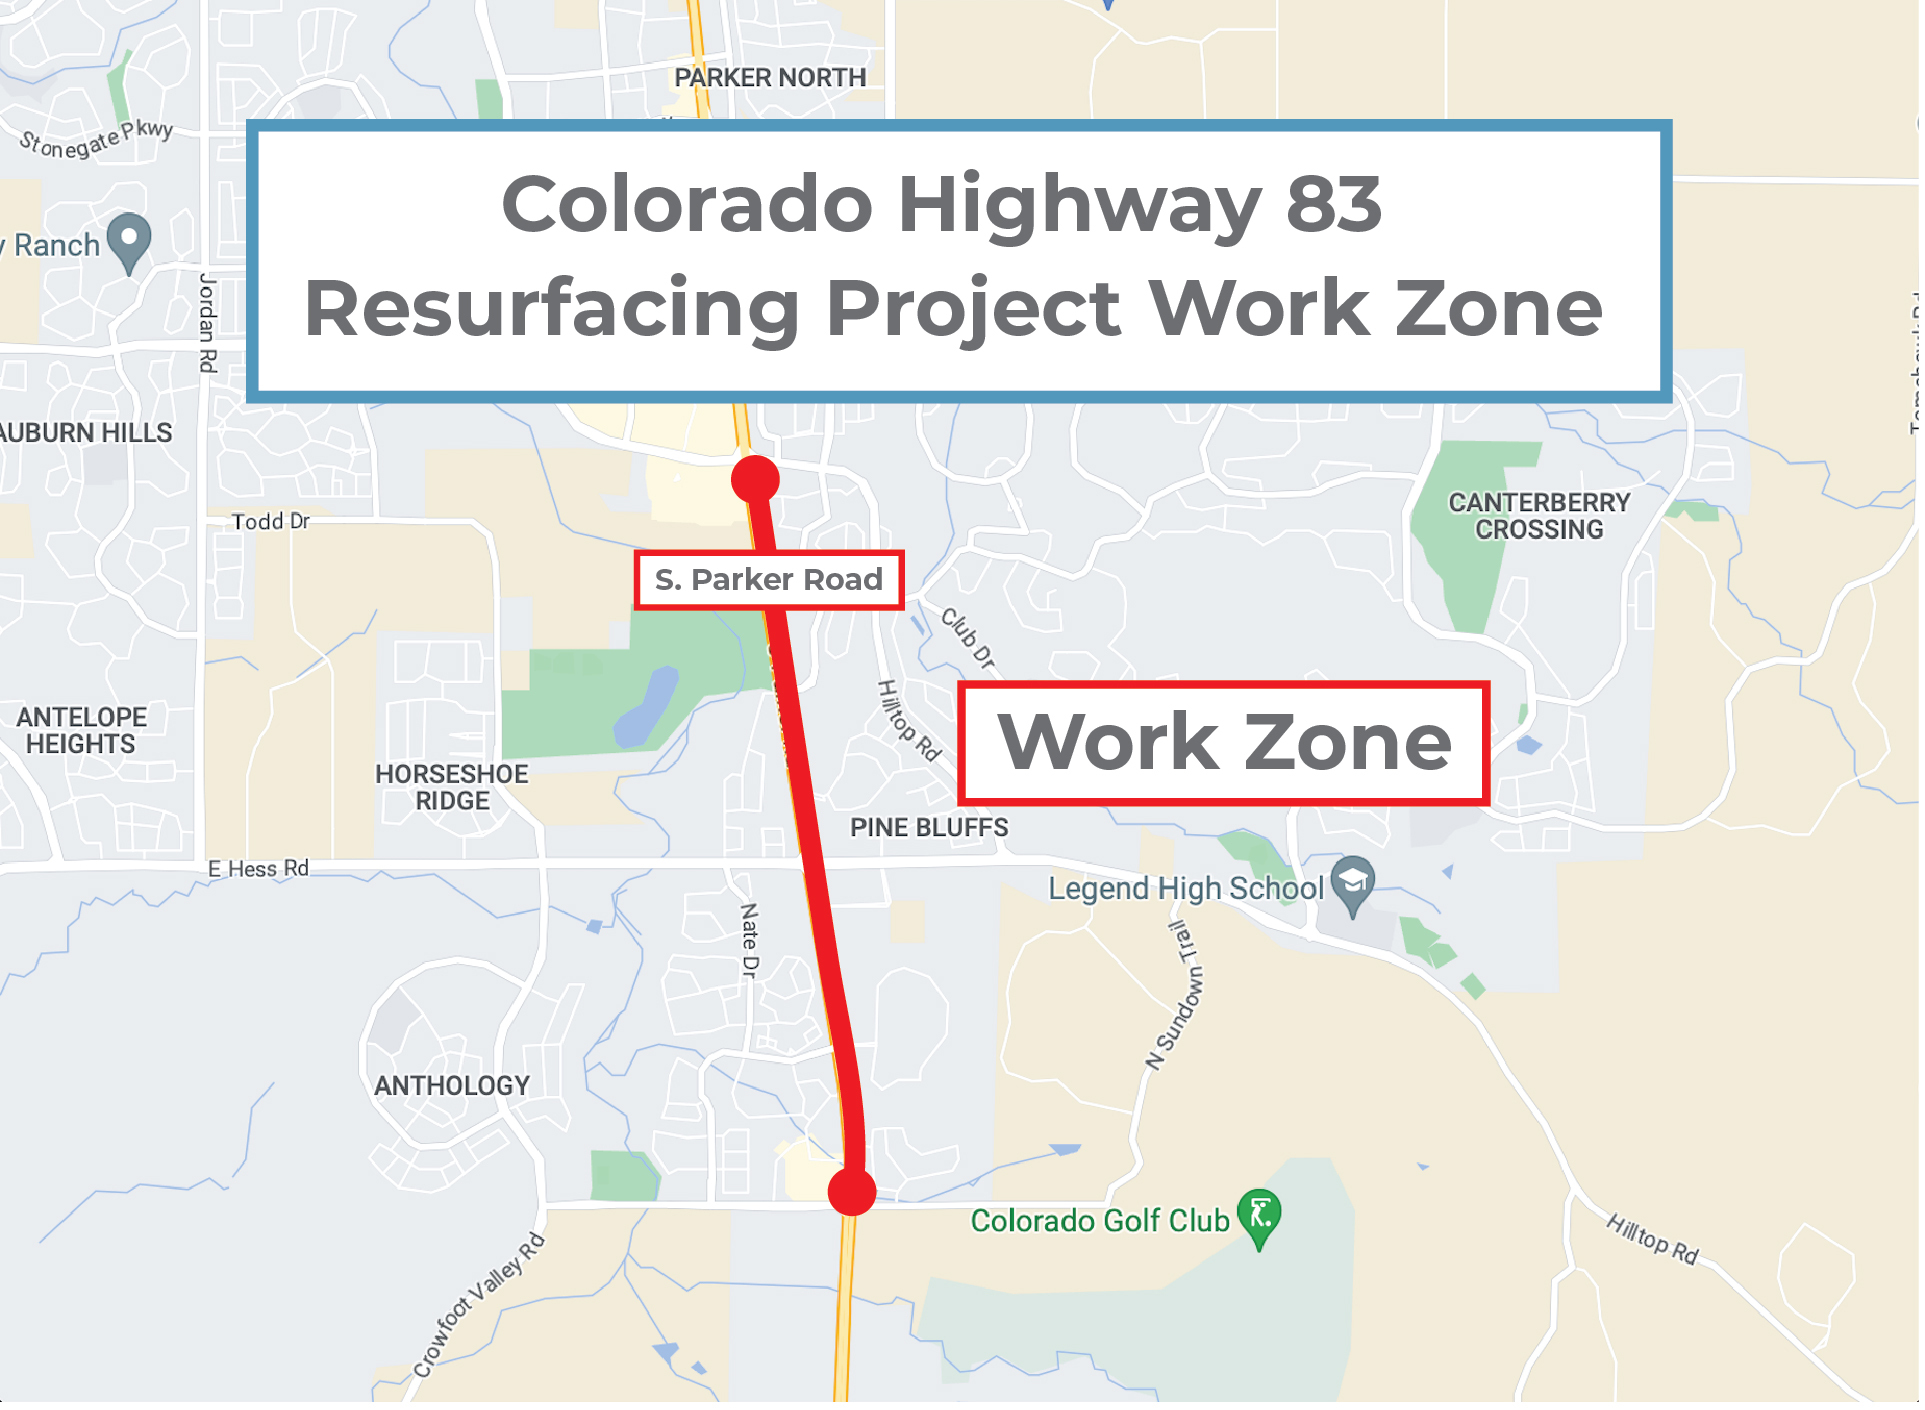 CO 83 Resurfacing Project Work Zone Map detail image